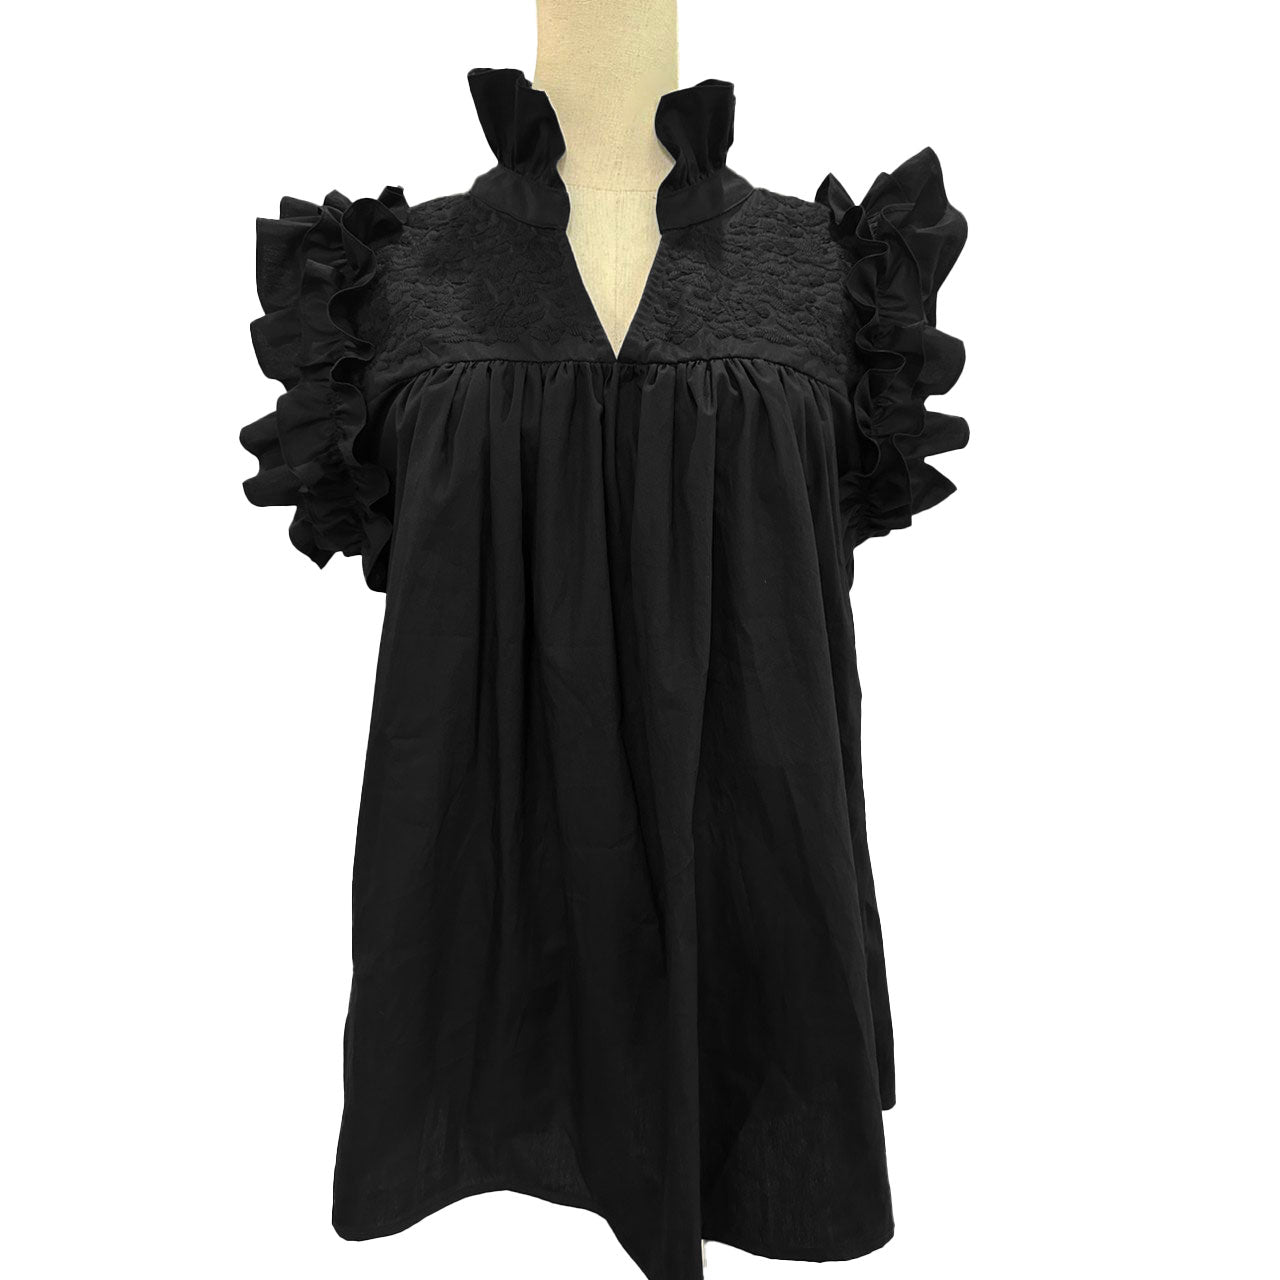 Double Black Hummingbird Blouse (S, M, and L only)